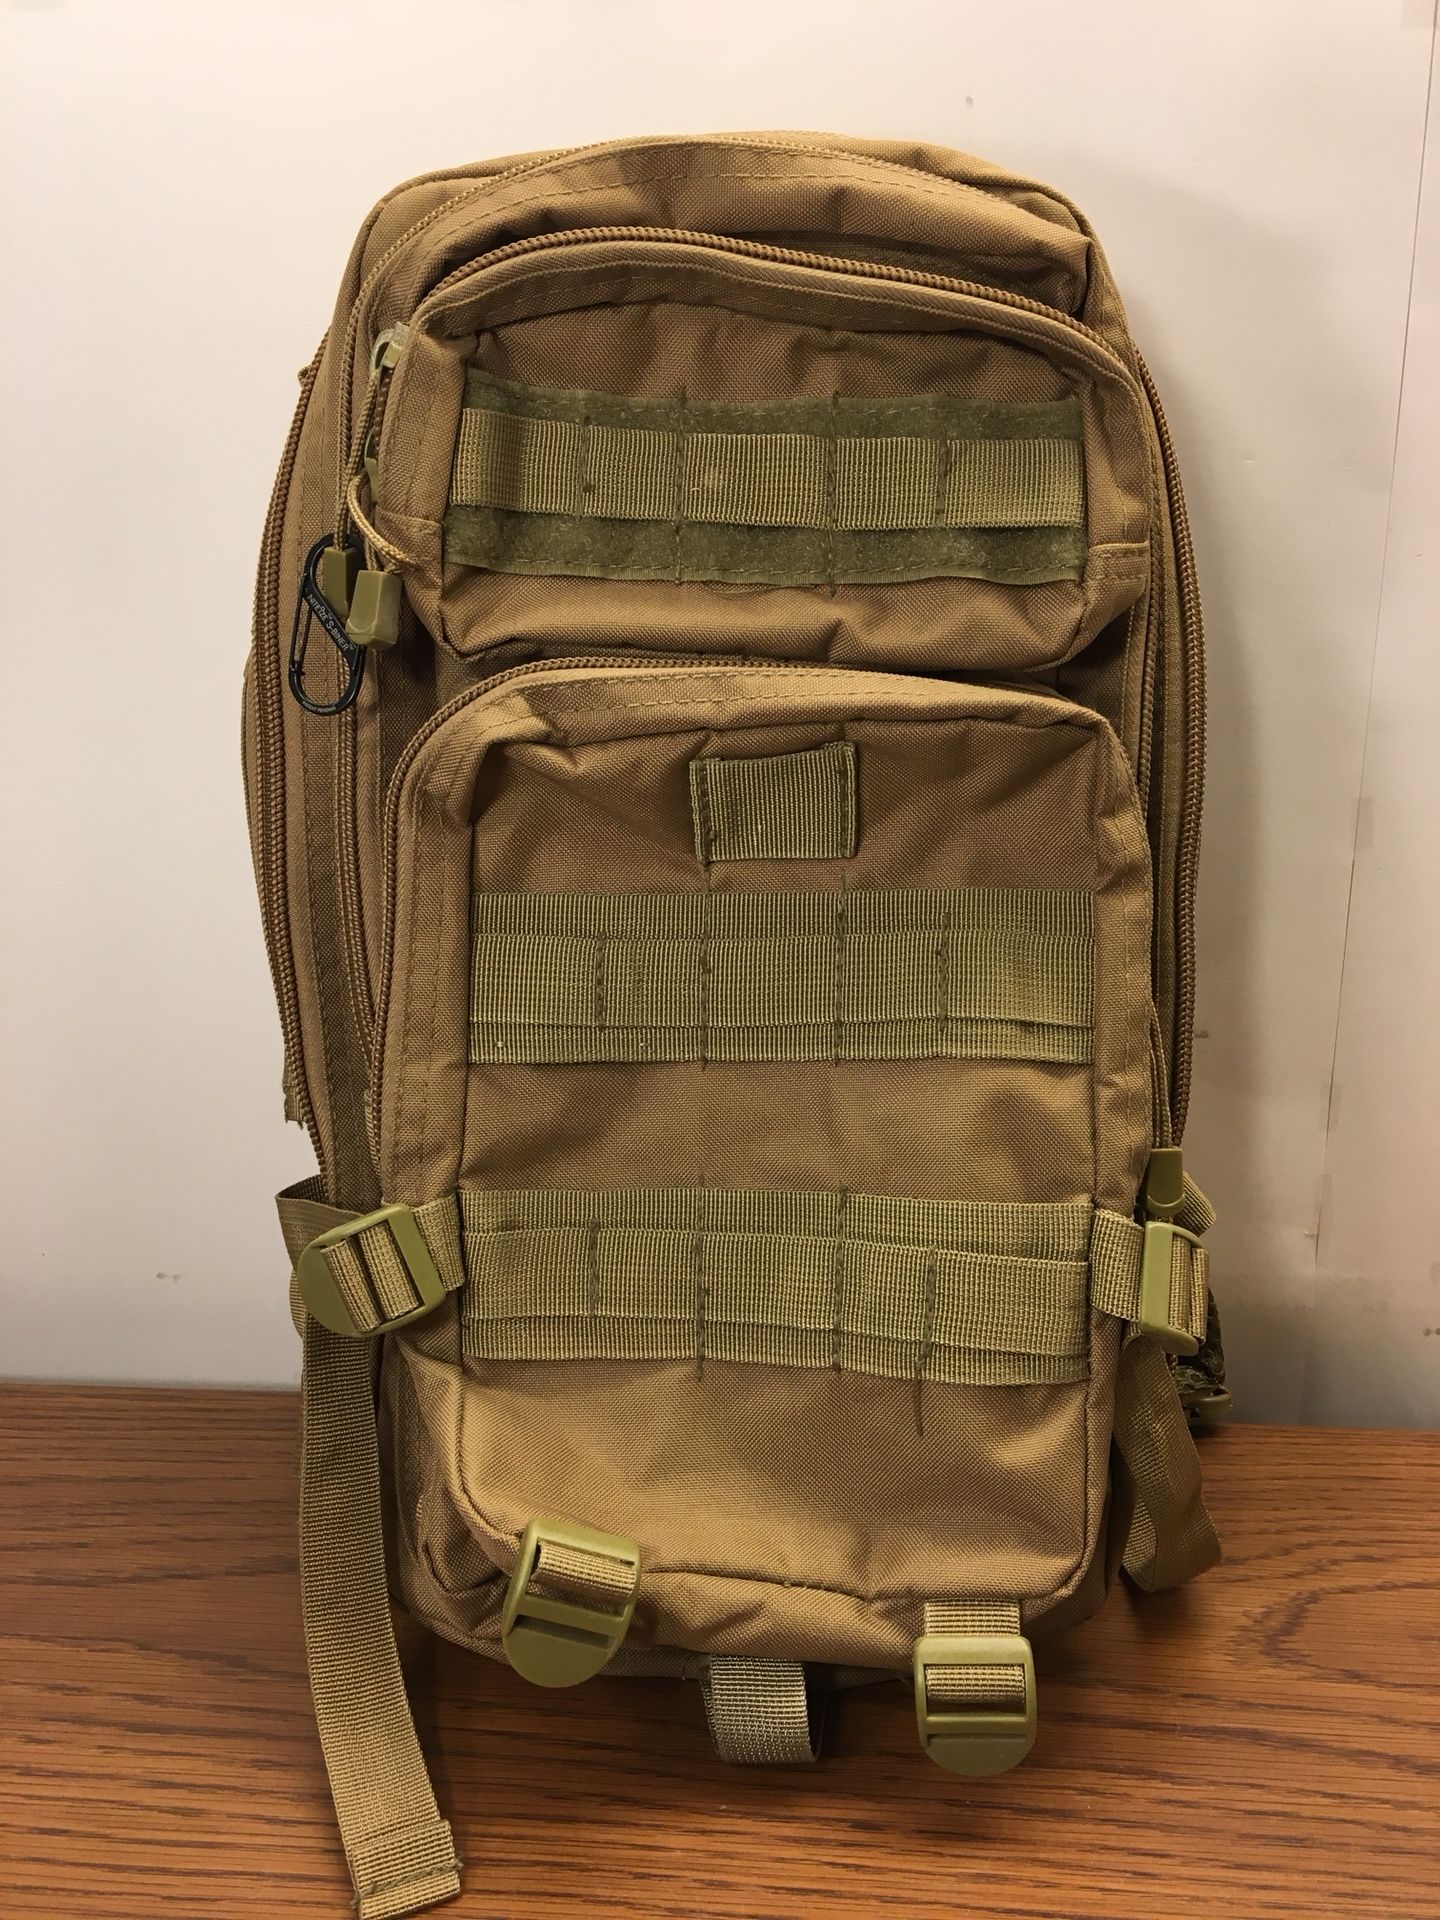 Fox Tactical BackPack Outdoor Military Style Hiking